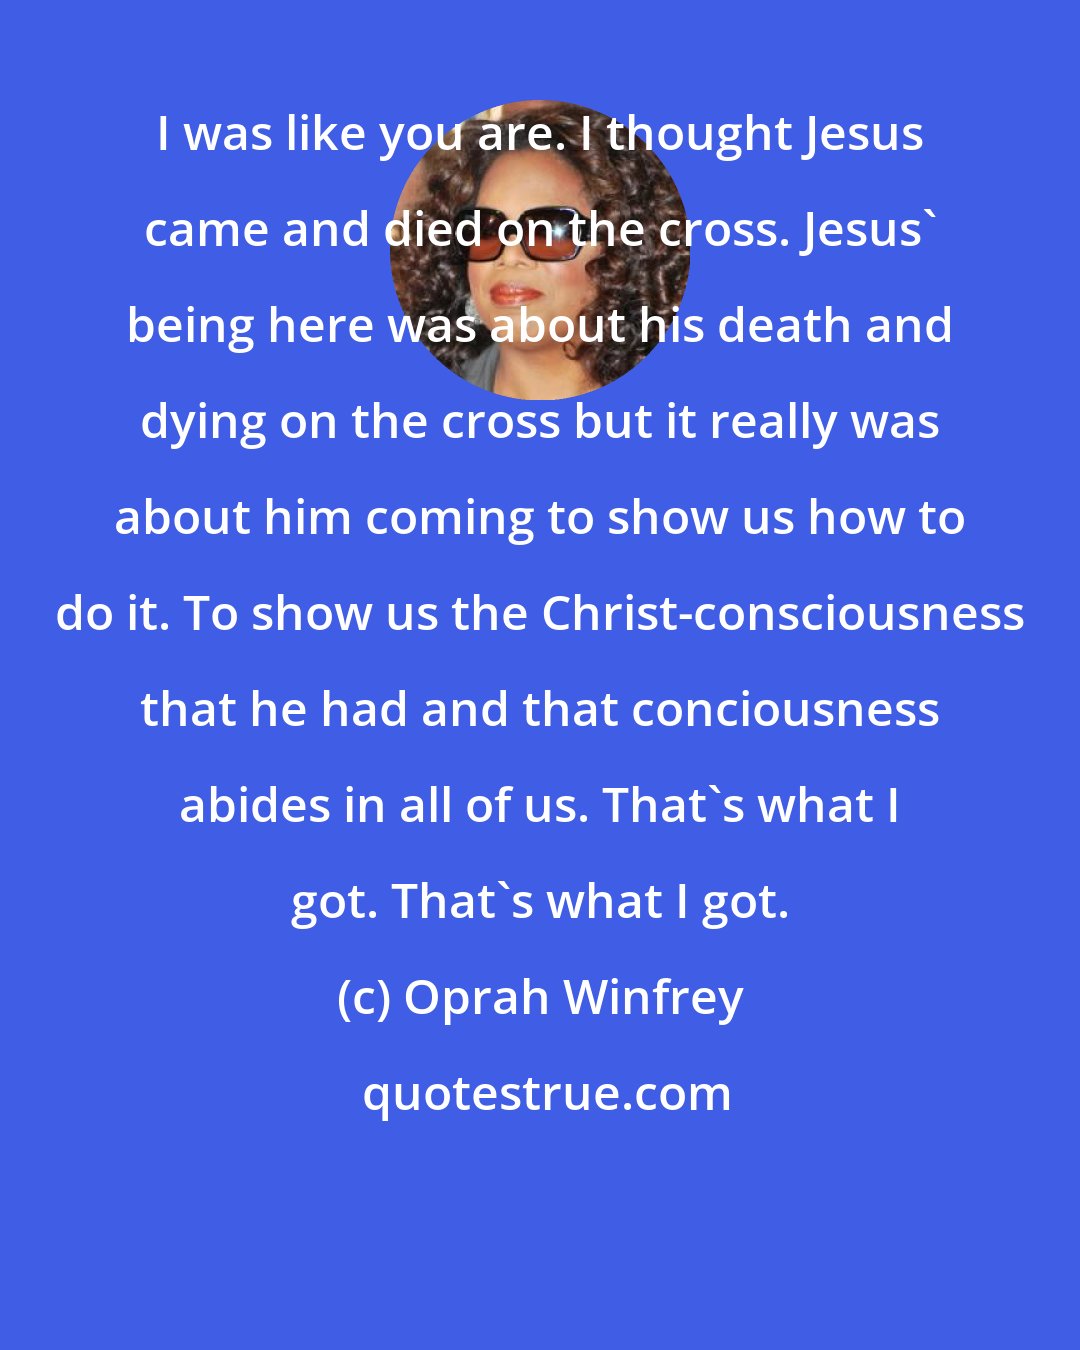 Oprah Winfrey: I was like you are. I thought Jesus came and died on the cross. Jesus' being here was about his death and dying on the cross but it really was about him coming to show us how to do it. To show us the Christ-consciousness that he had and that conciousness abides in all of us. That's what I got. That's what I got.